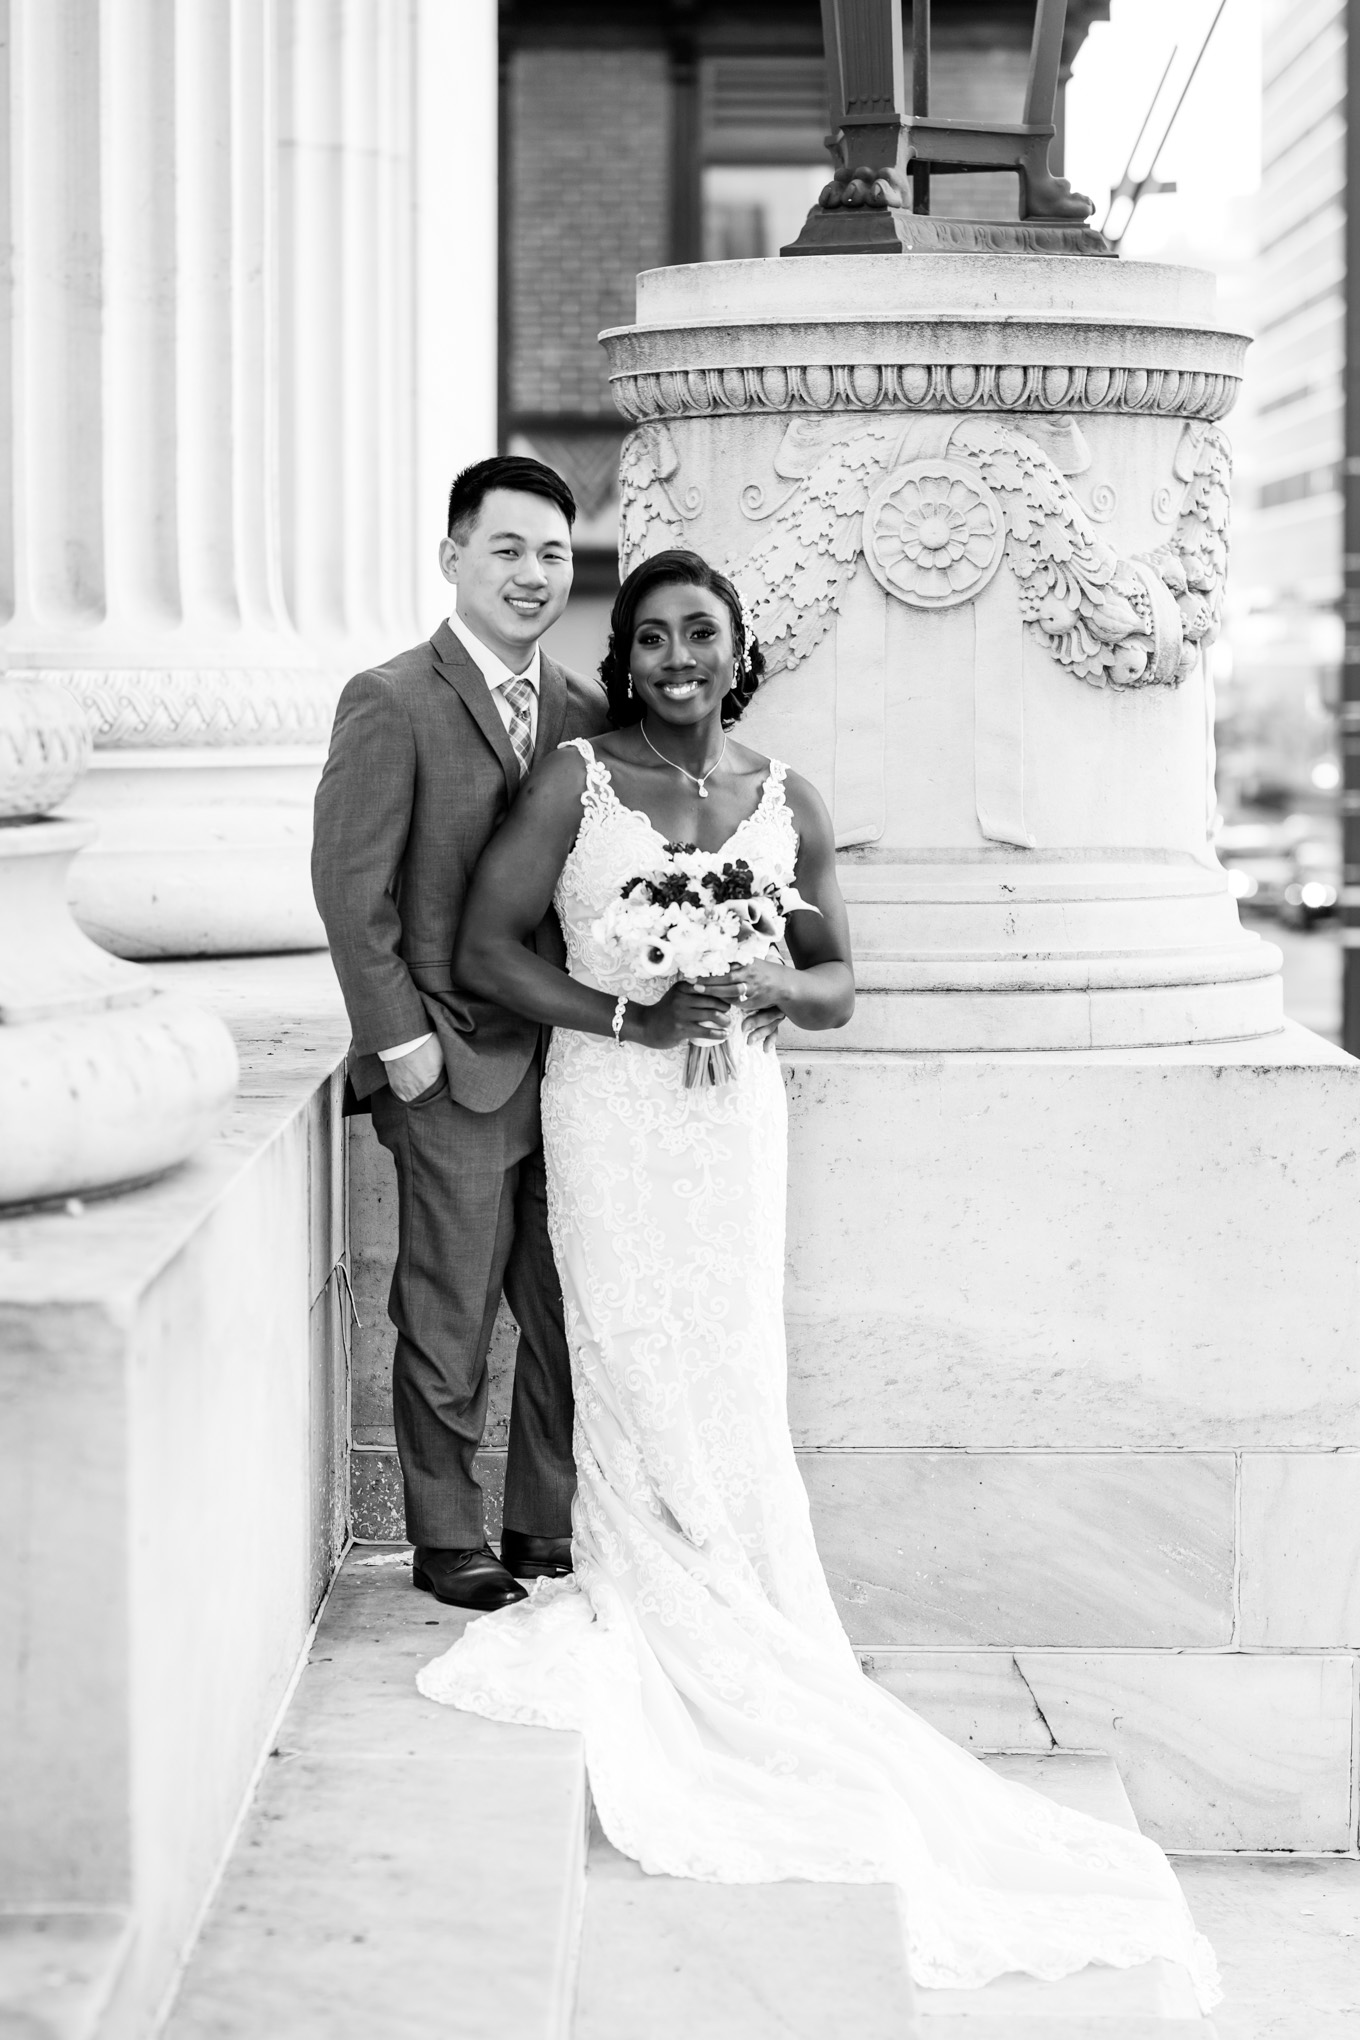 classic Baltimore wedding, Baltimore wedding, Hotel Monaco Baltimorre, Kimpton Hotel Monaco Baltimore, Kimpton Hotels, indoor wedding, flash photography, Maryland wedding, Maryland wedding photography, Maryland wedding photographer, Baltimore wedding photographer, DC wedding photographer, hotel wedding, classic wedding, Zales wedding rings, Essence of Australia, Dolled by Nueye, Talia Yvette, Sensational Flowers, black and white wedding photography, bride and groom portraits, natural light wedding portraits, classic black and white portraits